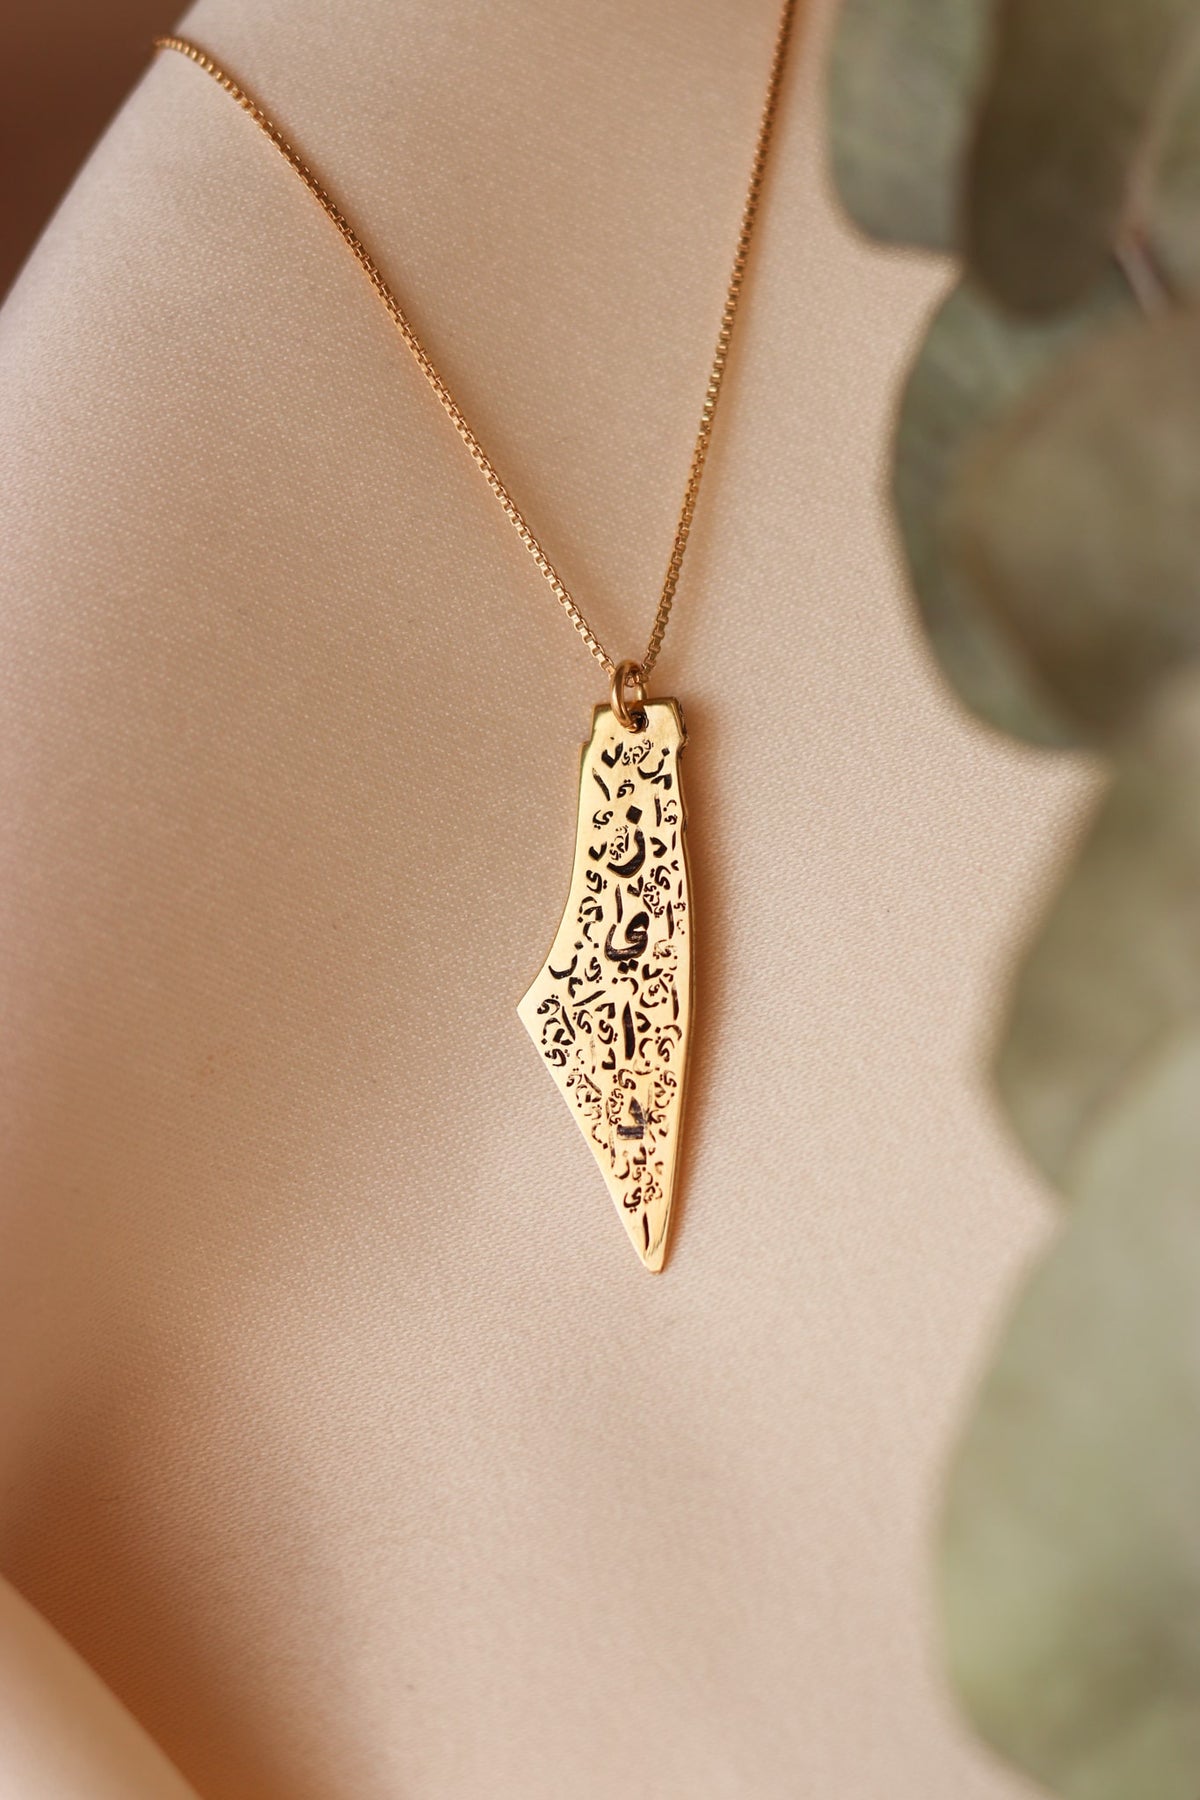 Palestine map with Arabic name letters engraved inside necklace